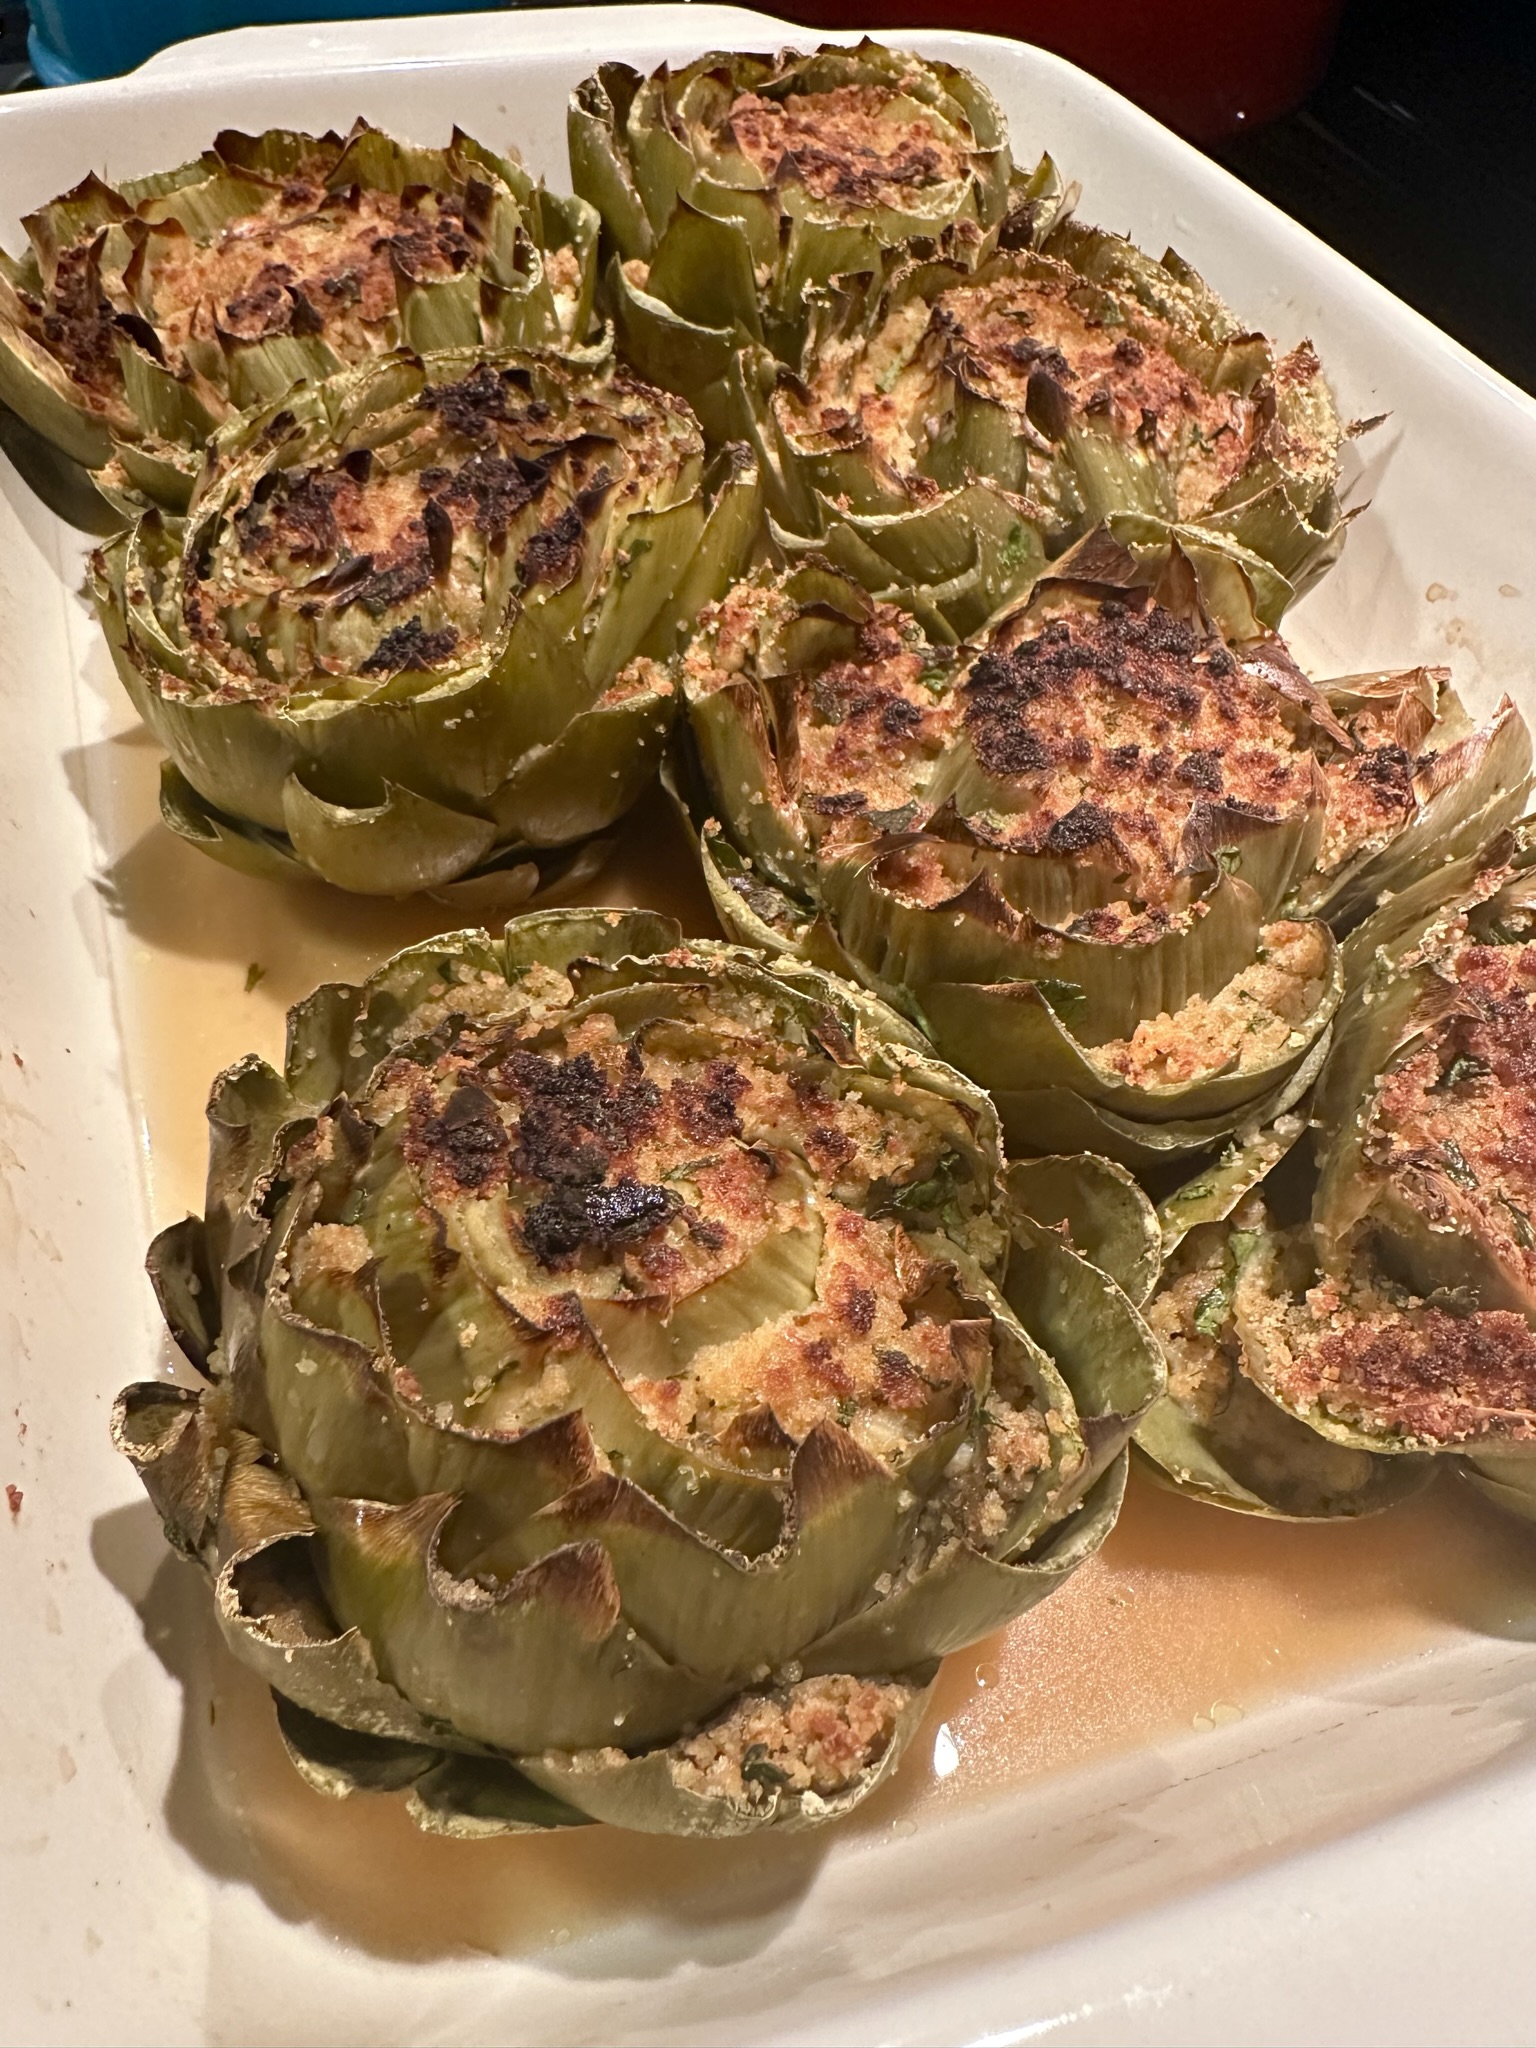 Artichokes stuffed with cheese and breadcrumbs